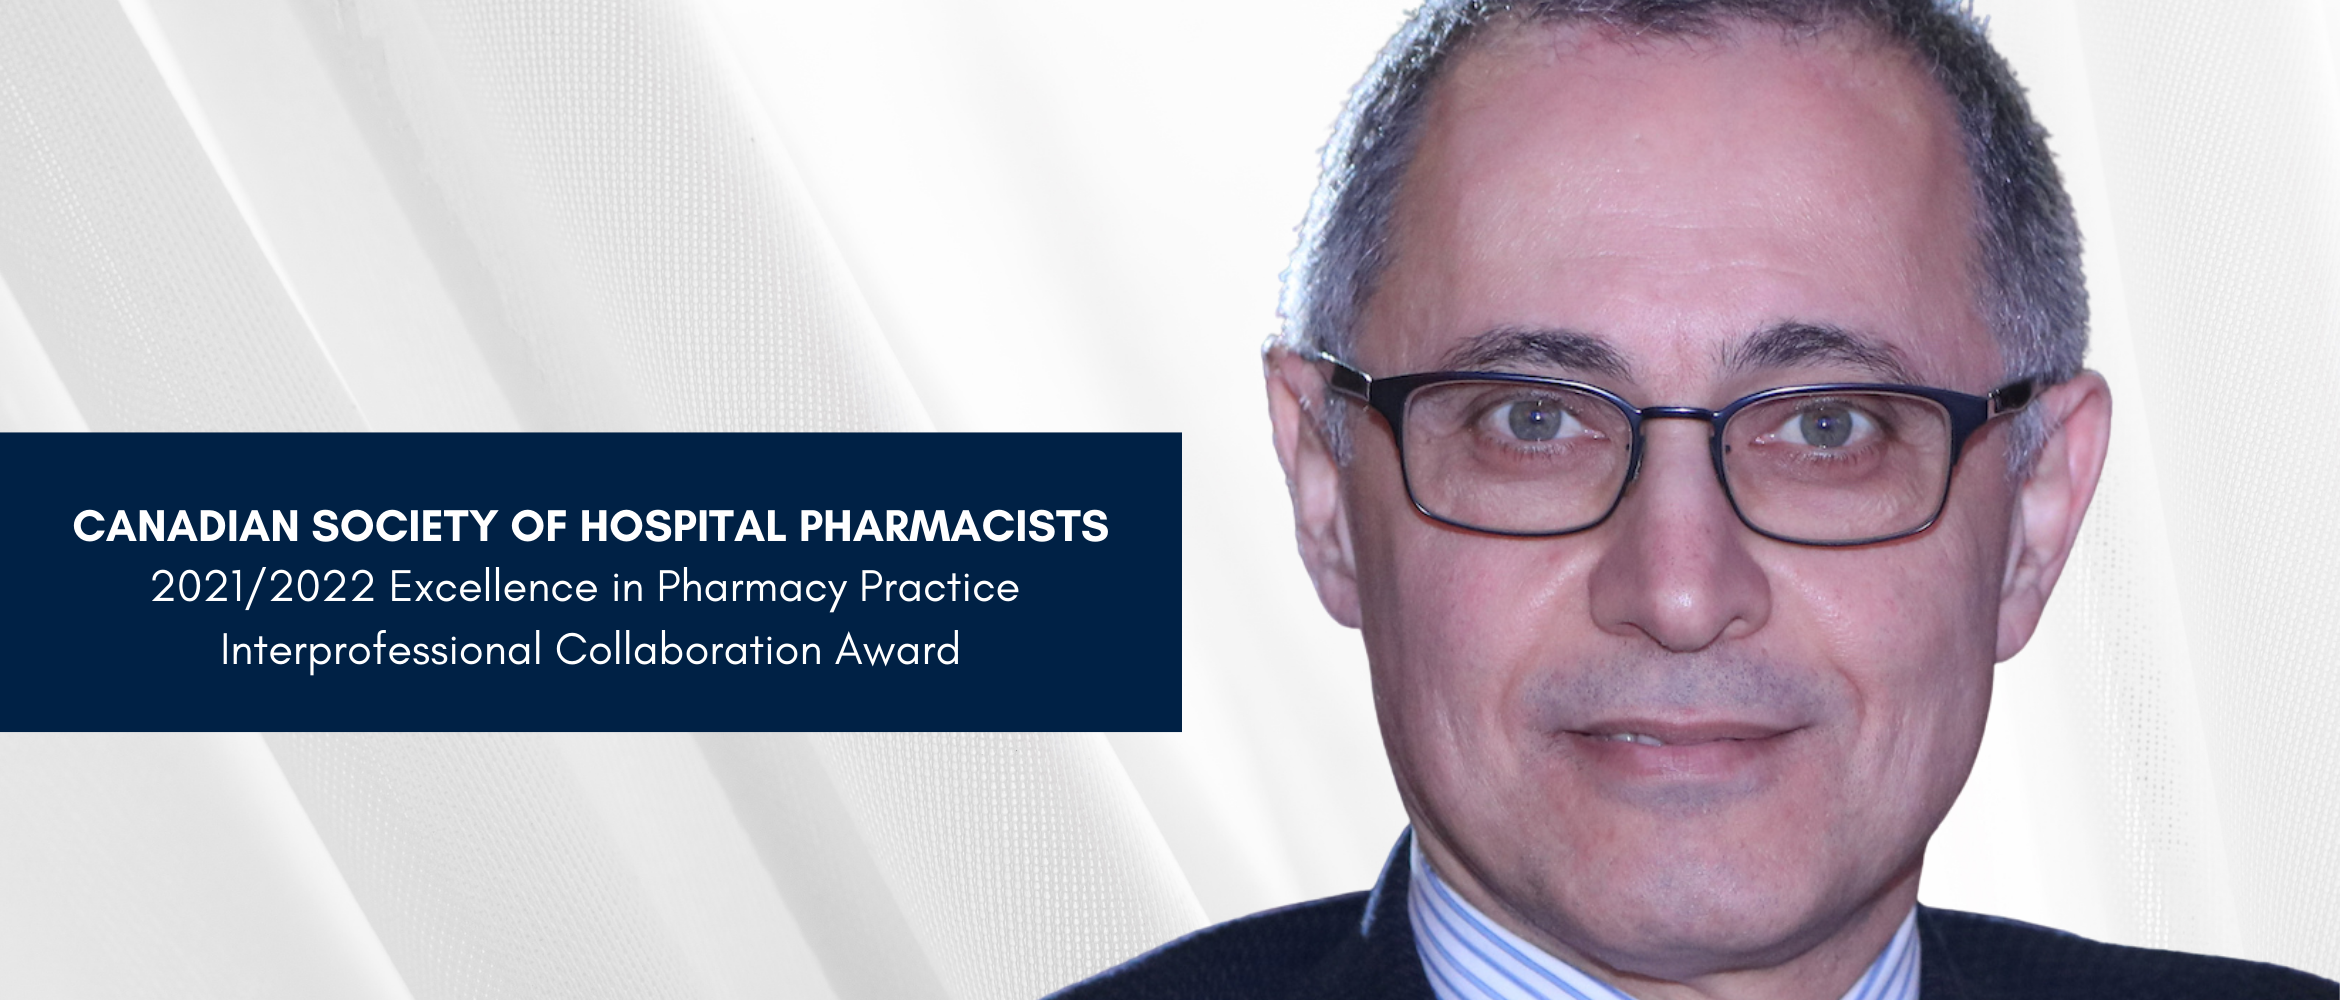 Dr. Bas Masri co-authors 2021/2022 Excellence in Pharmacy Practice Award-winning study